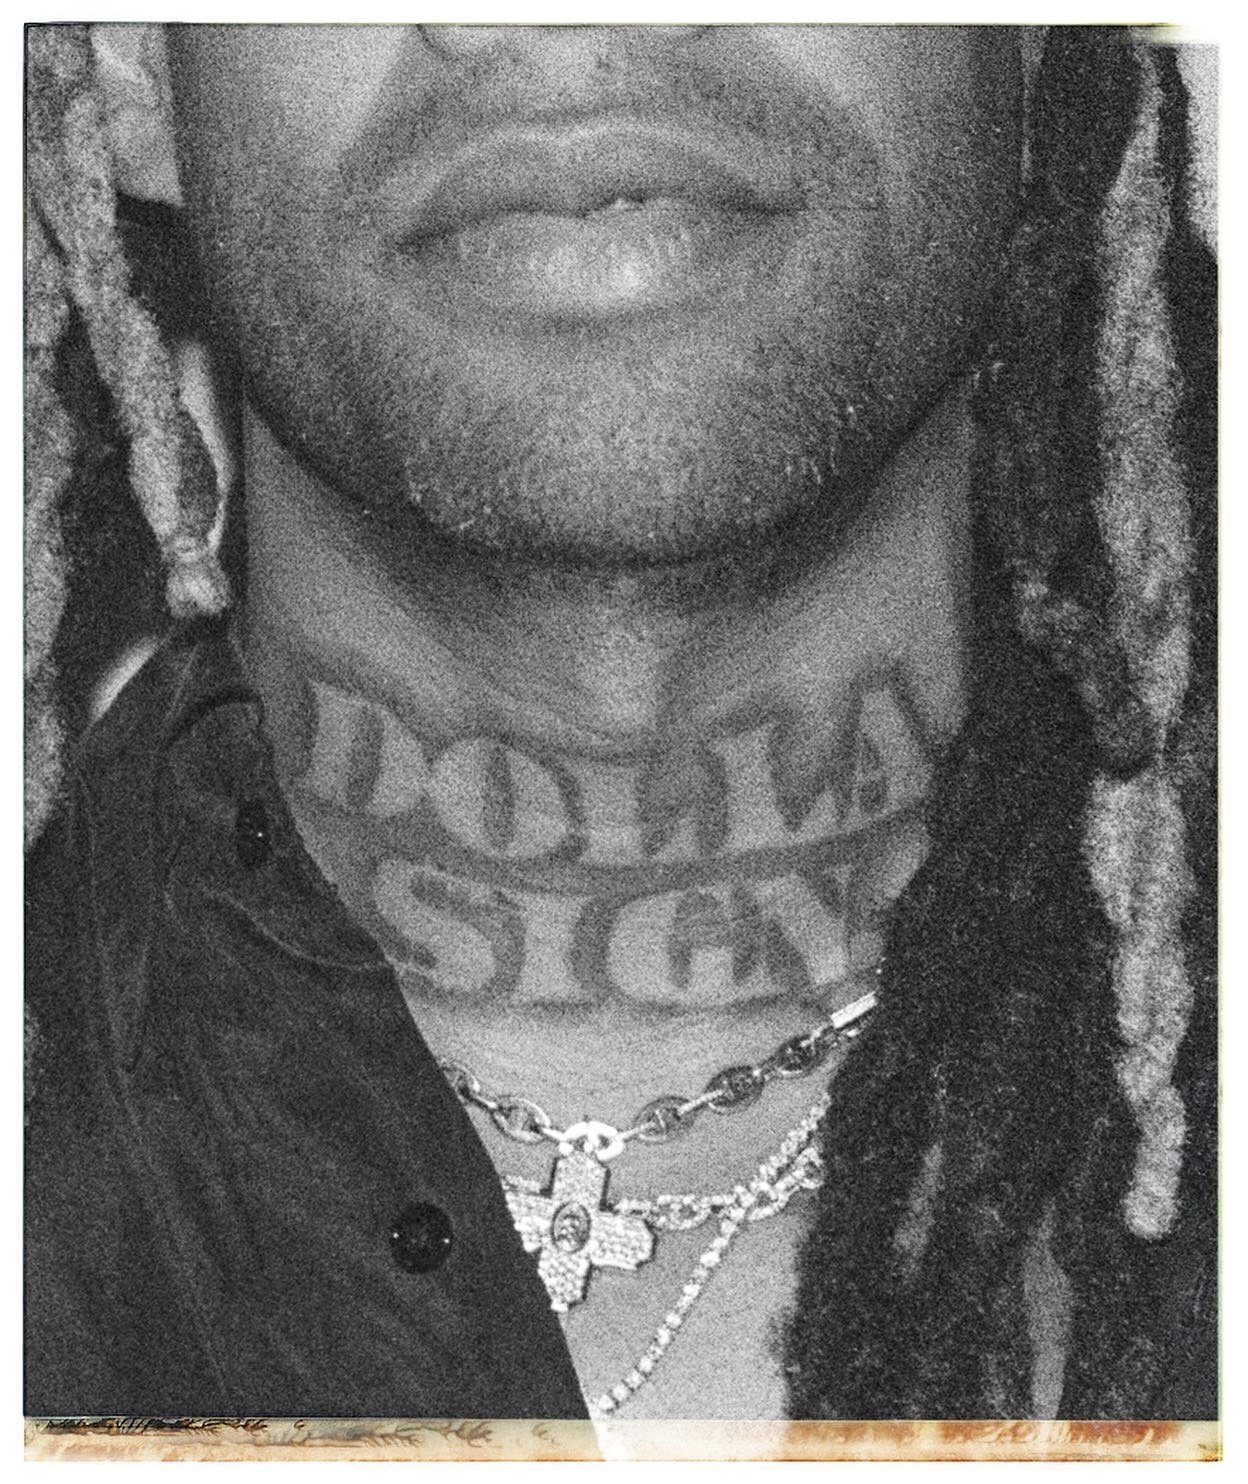 Ty Dolla Sign • Los Angeles 